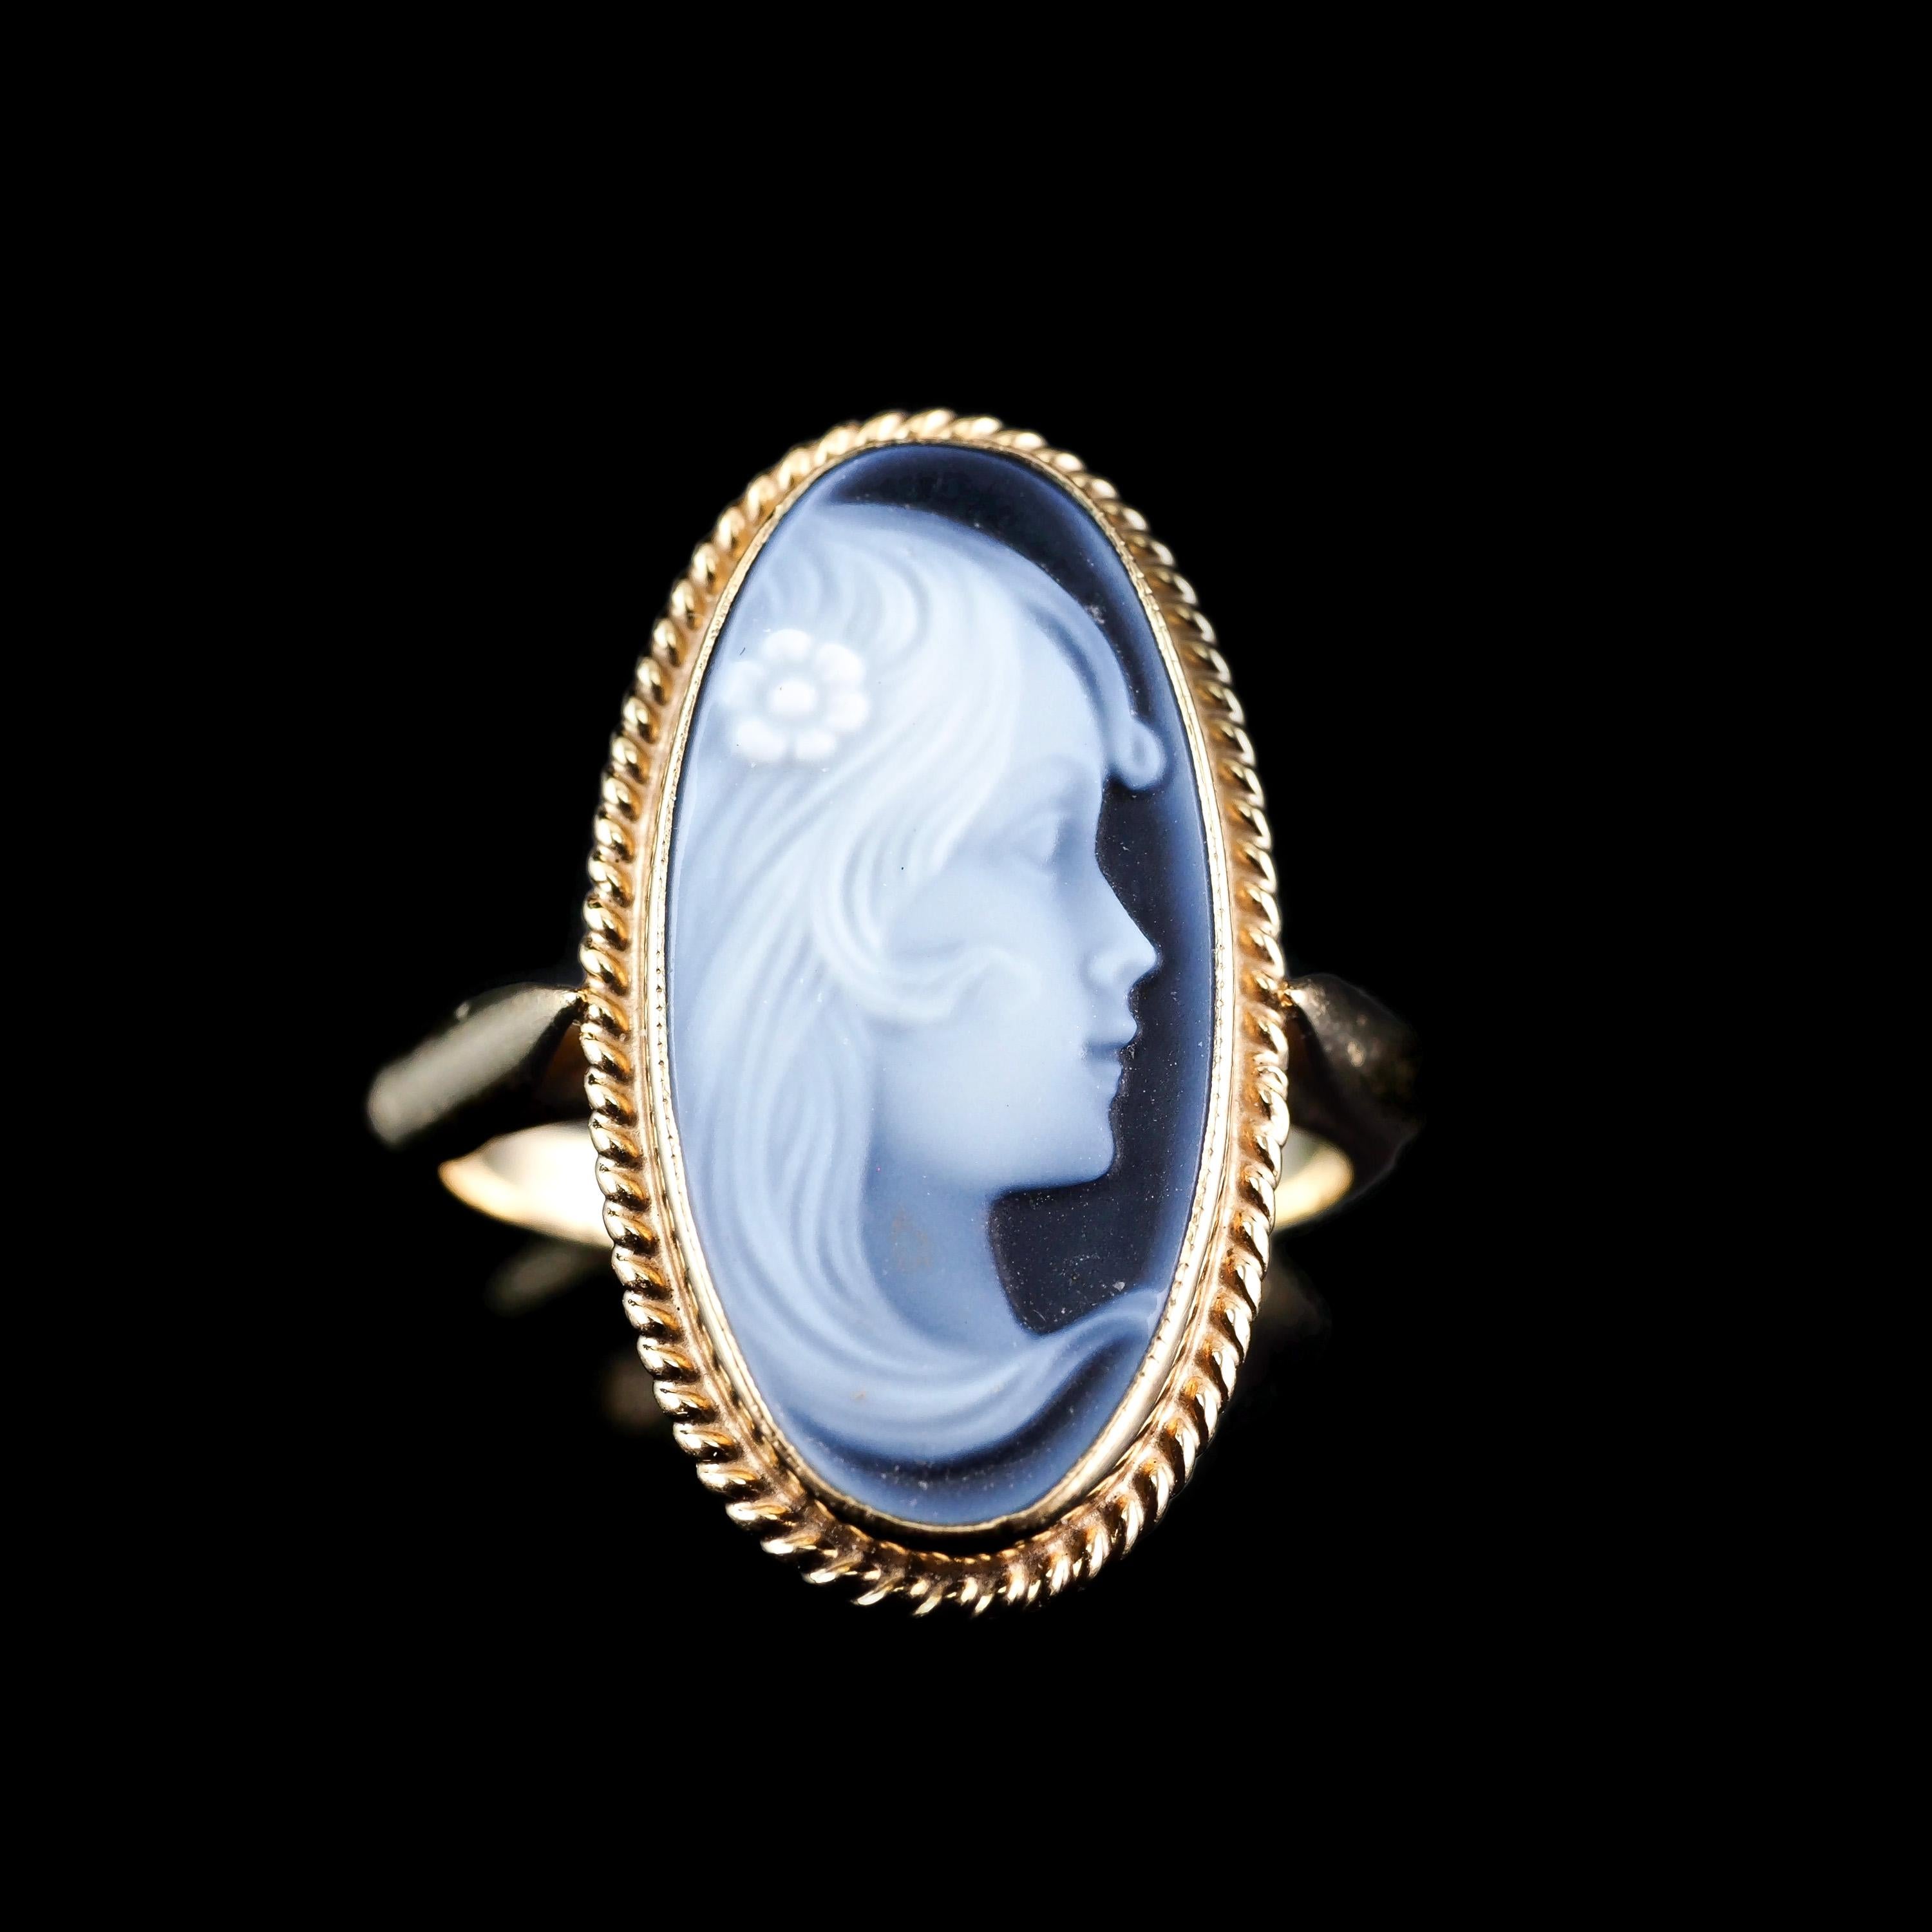 9 Carat Gold Agate Cameo Ring with Beautiful Figural Maiden Head 5